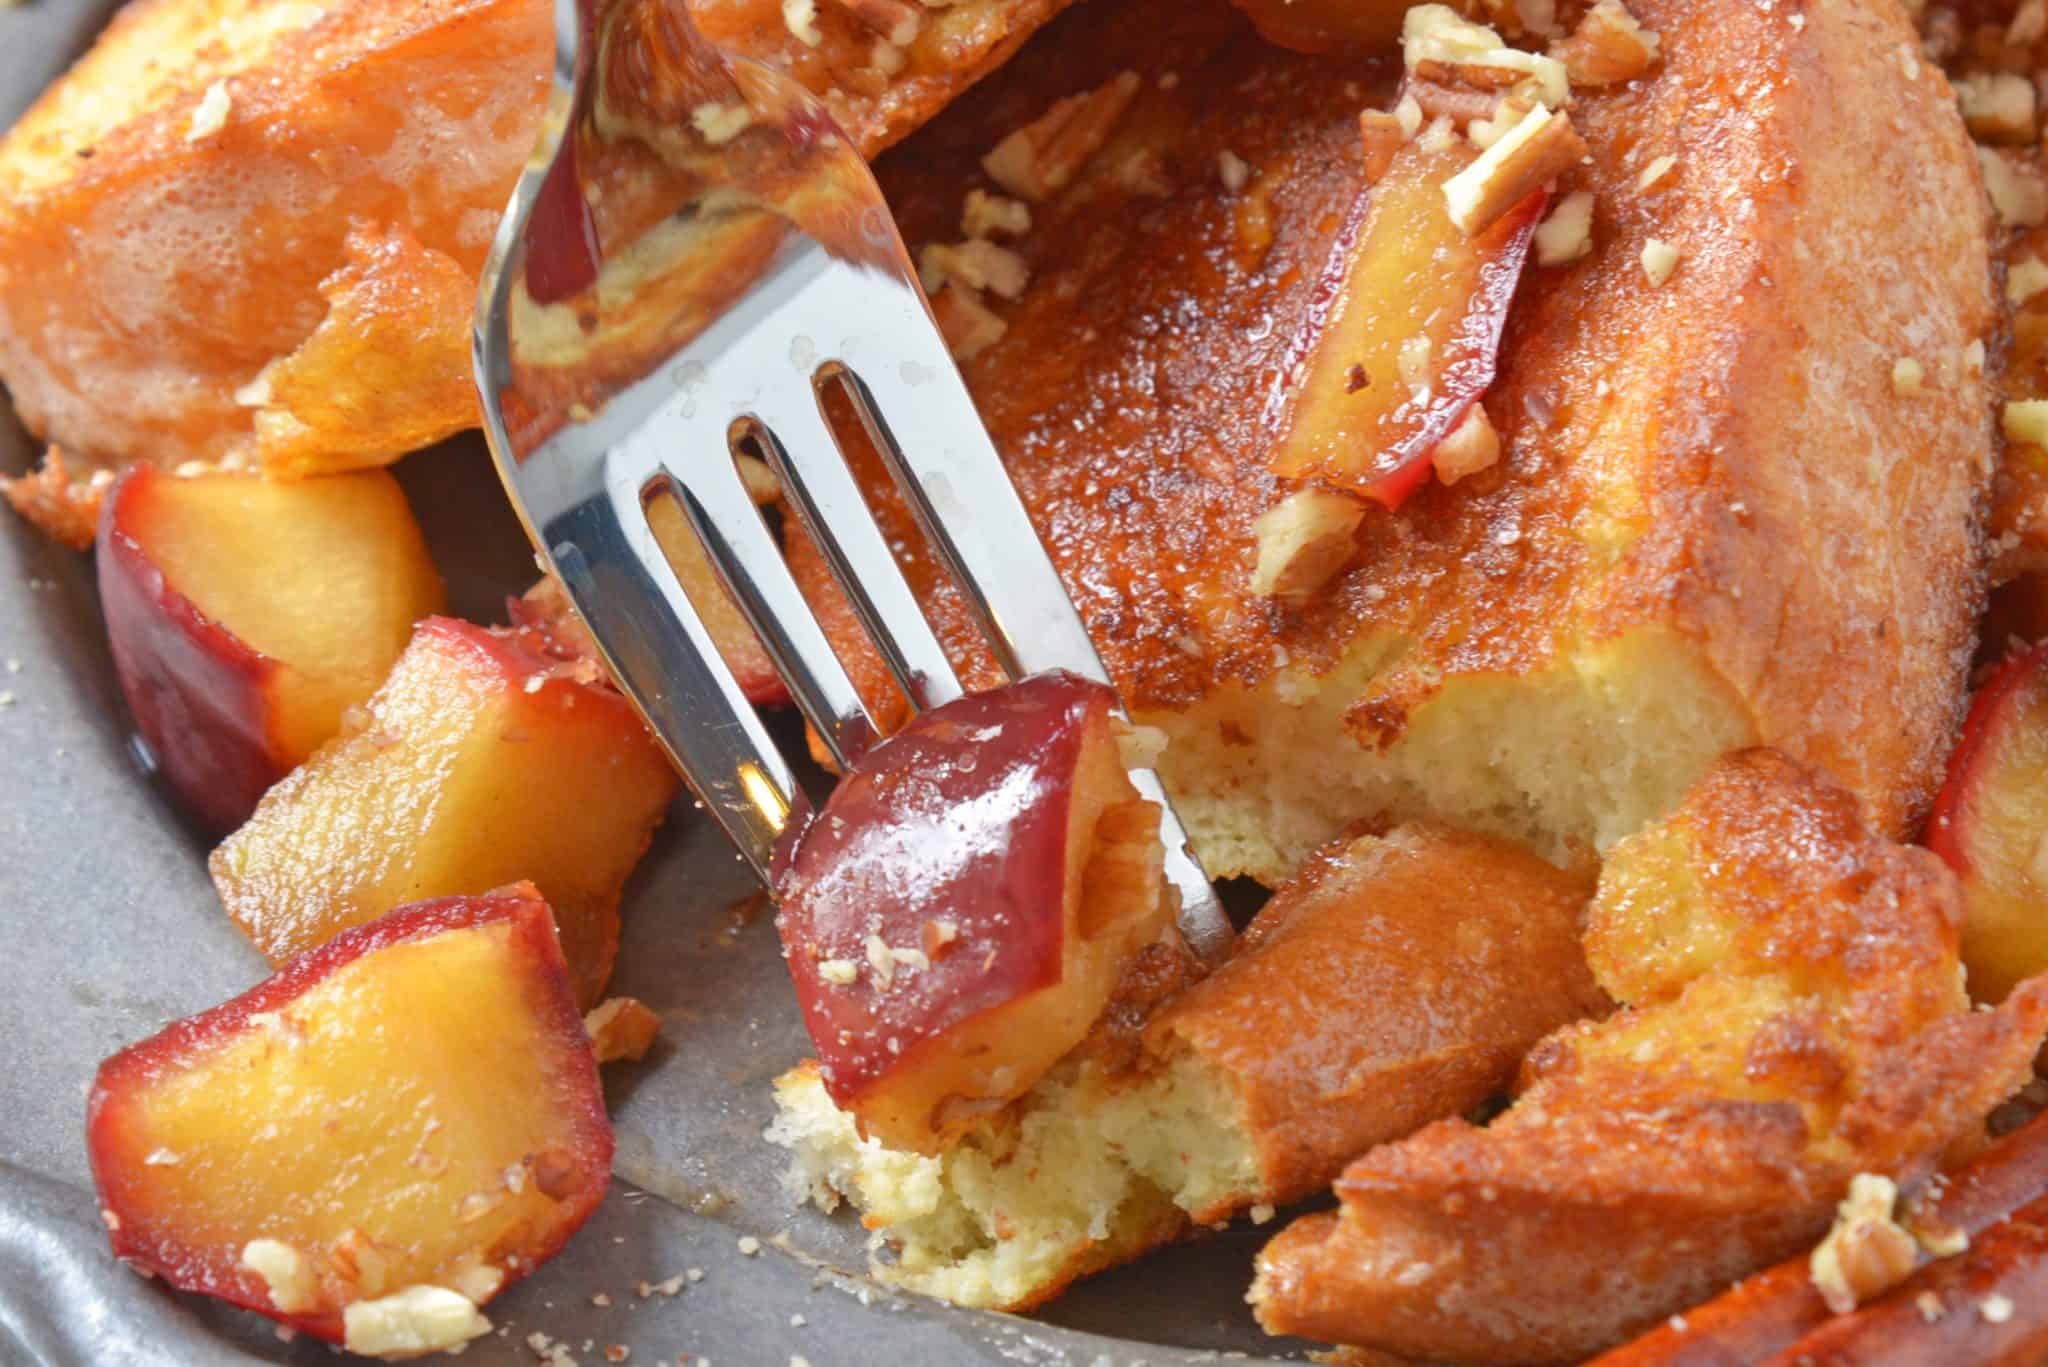 Apple Cinnamon French Toast is the perfect breakfast or brunch recipe for fall! This cinnamon french toast will jump start your fall season. #frenchtoastrecipe #cinnamonfrenchtoast www.savoryexperiments.com